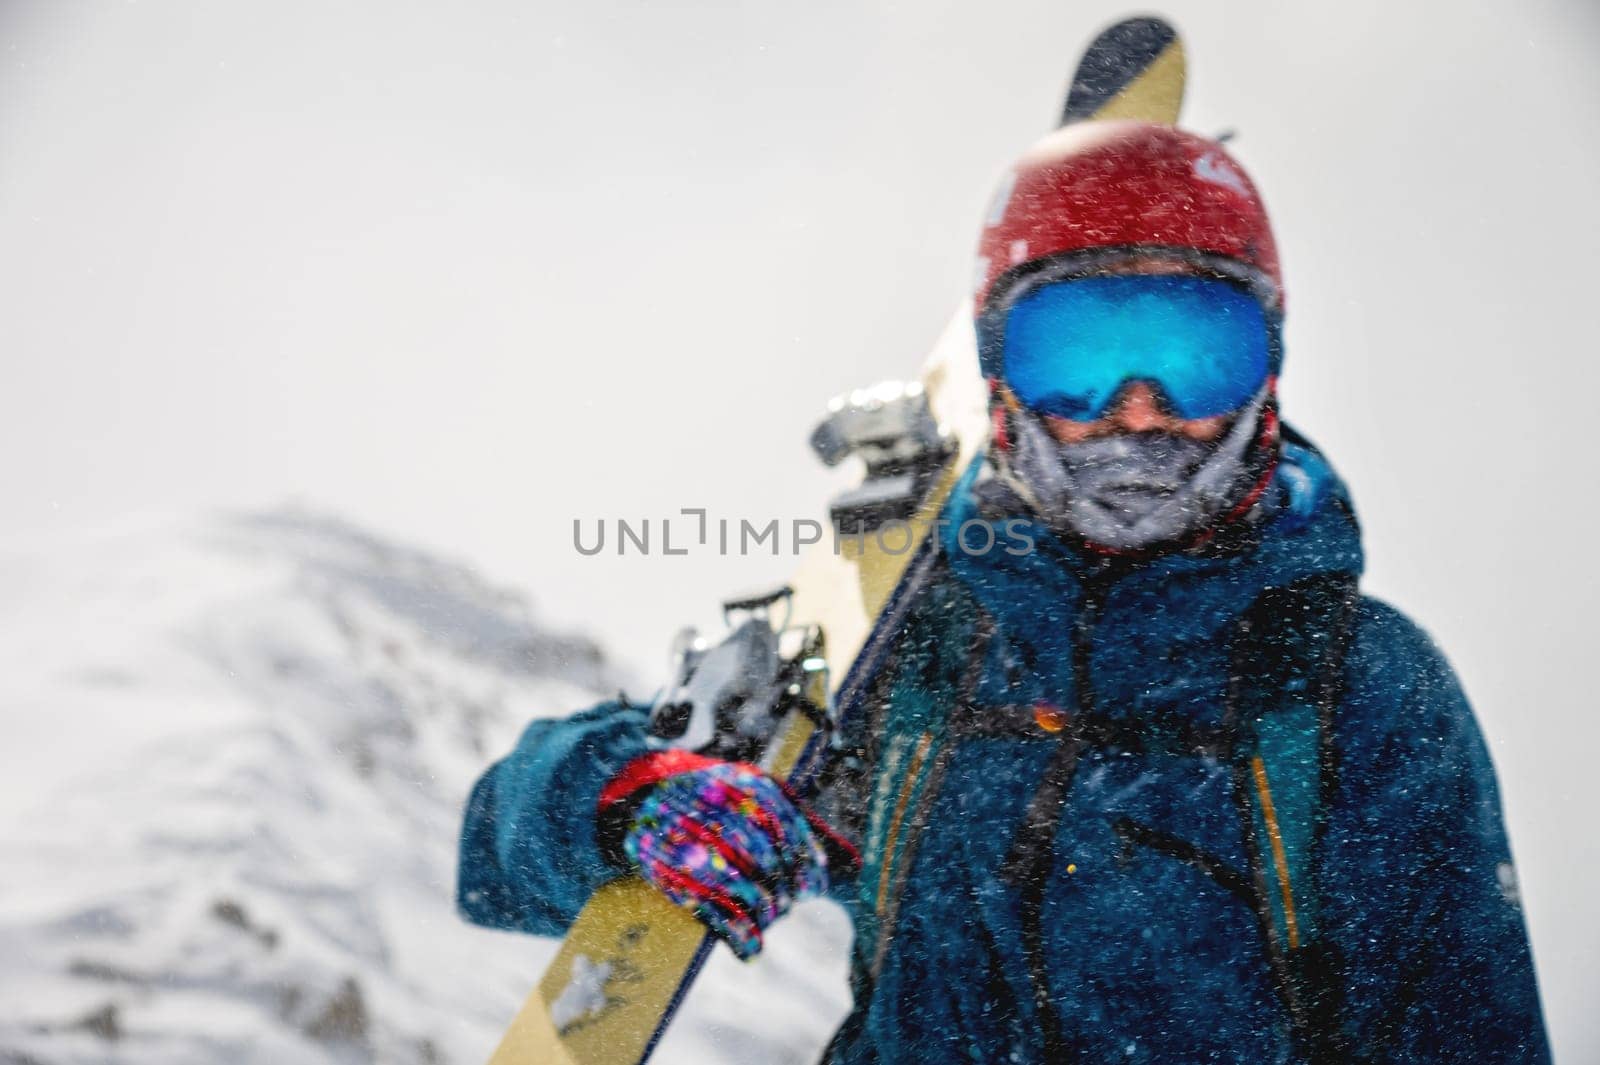 Defocused skier portrait during a snowstorm high in the mountains. Focus on the snow particles in front of the skier. Copy space top skier in blur.